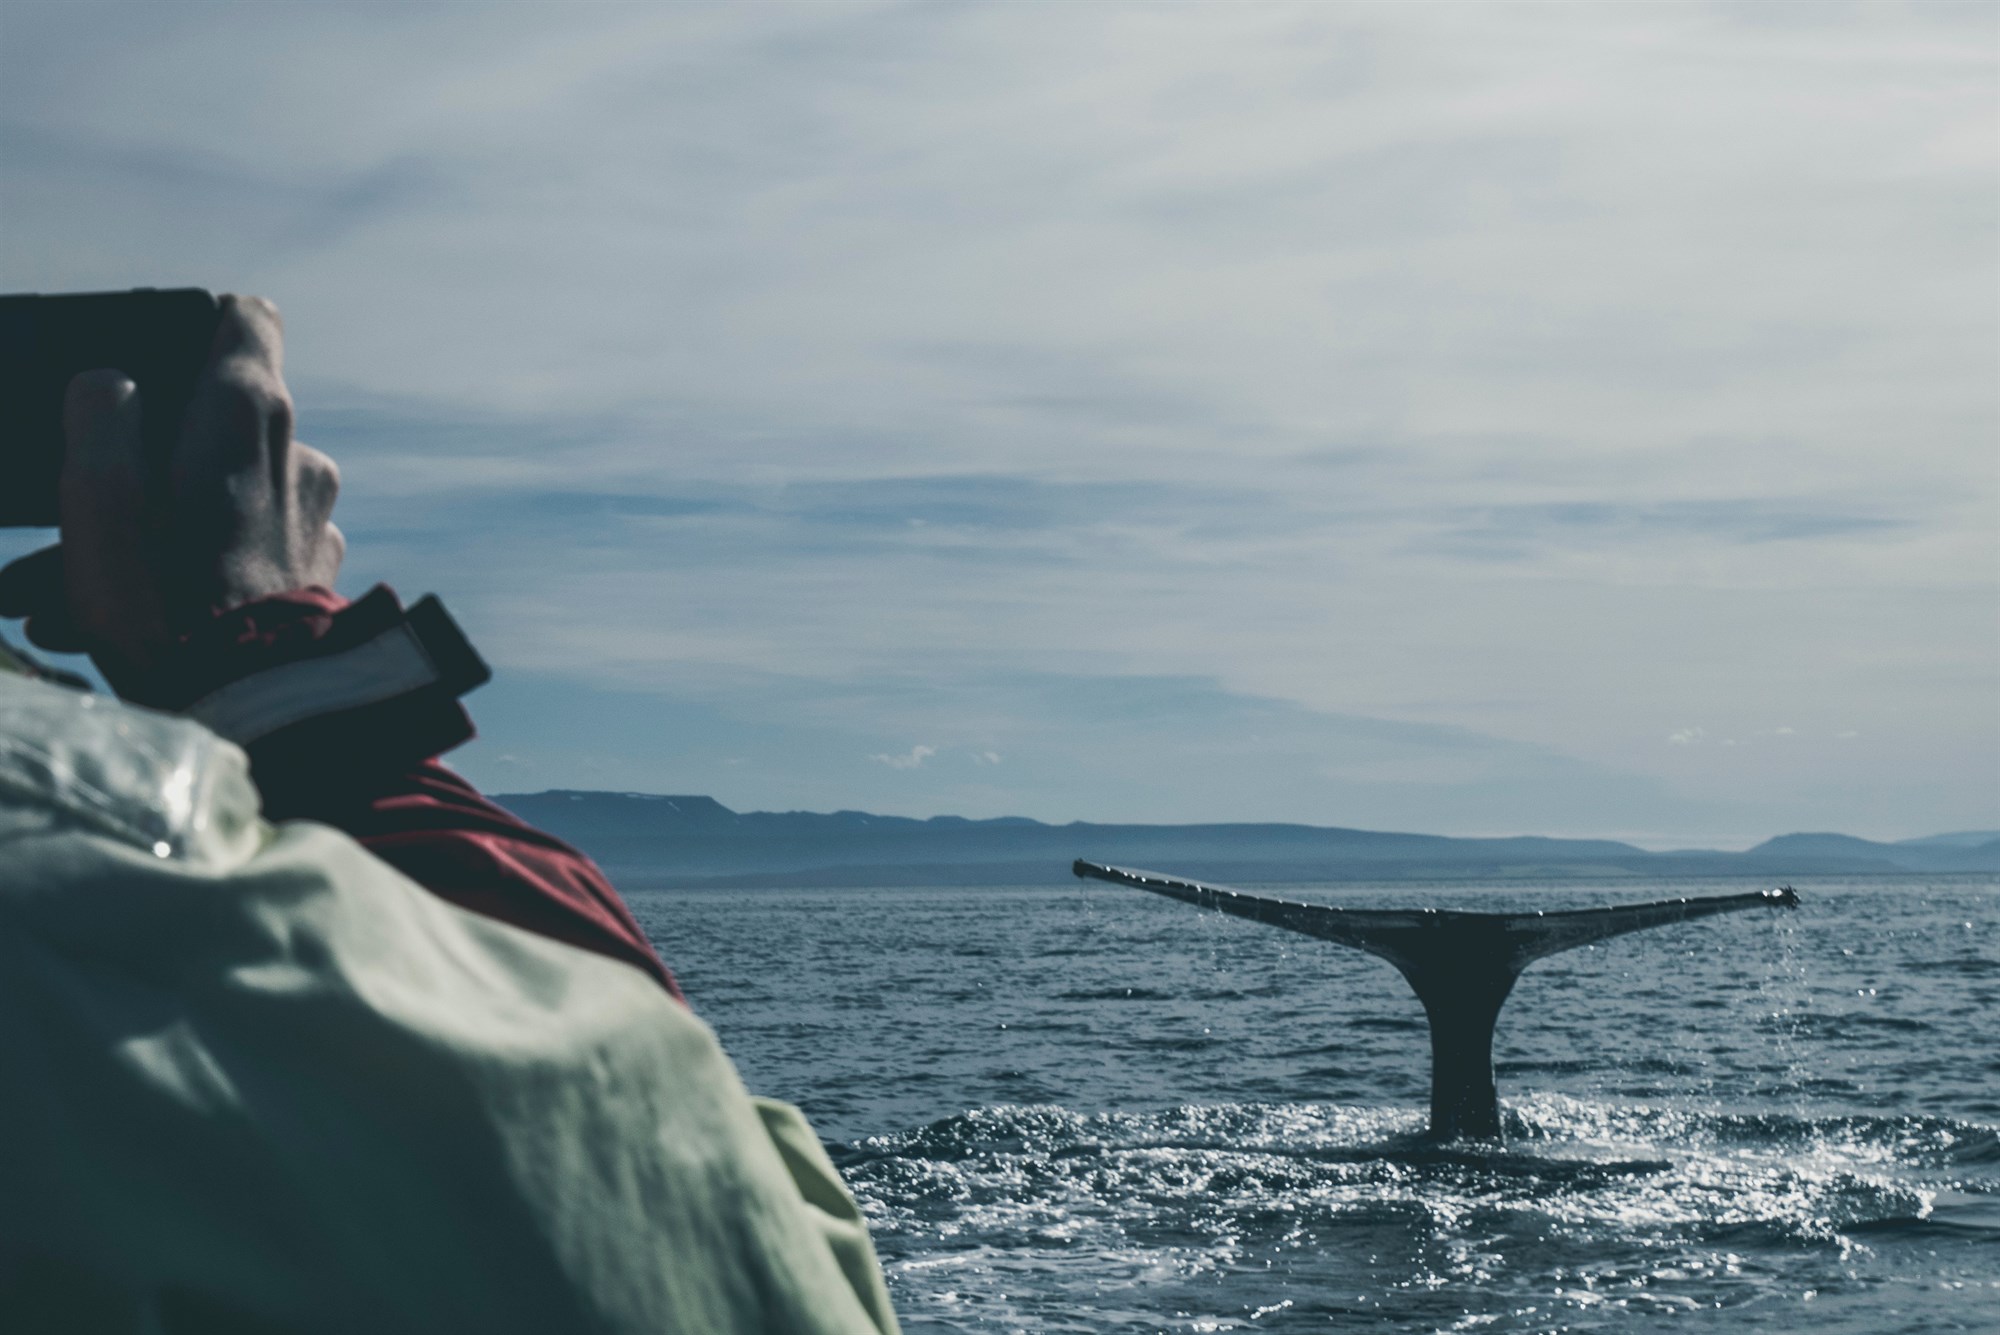 Man watching Whale in the sea off of Iceland's coast